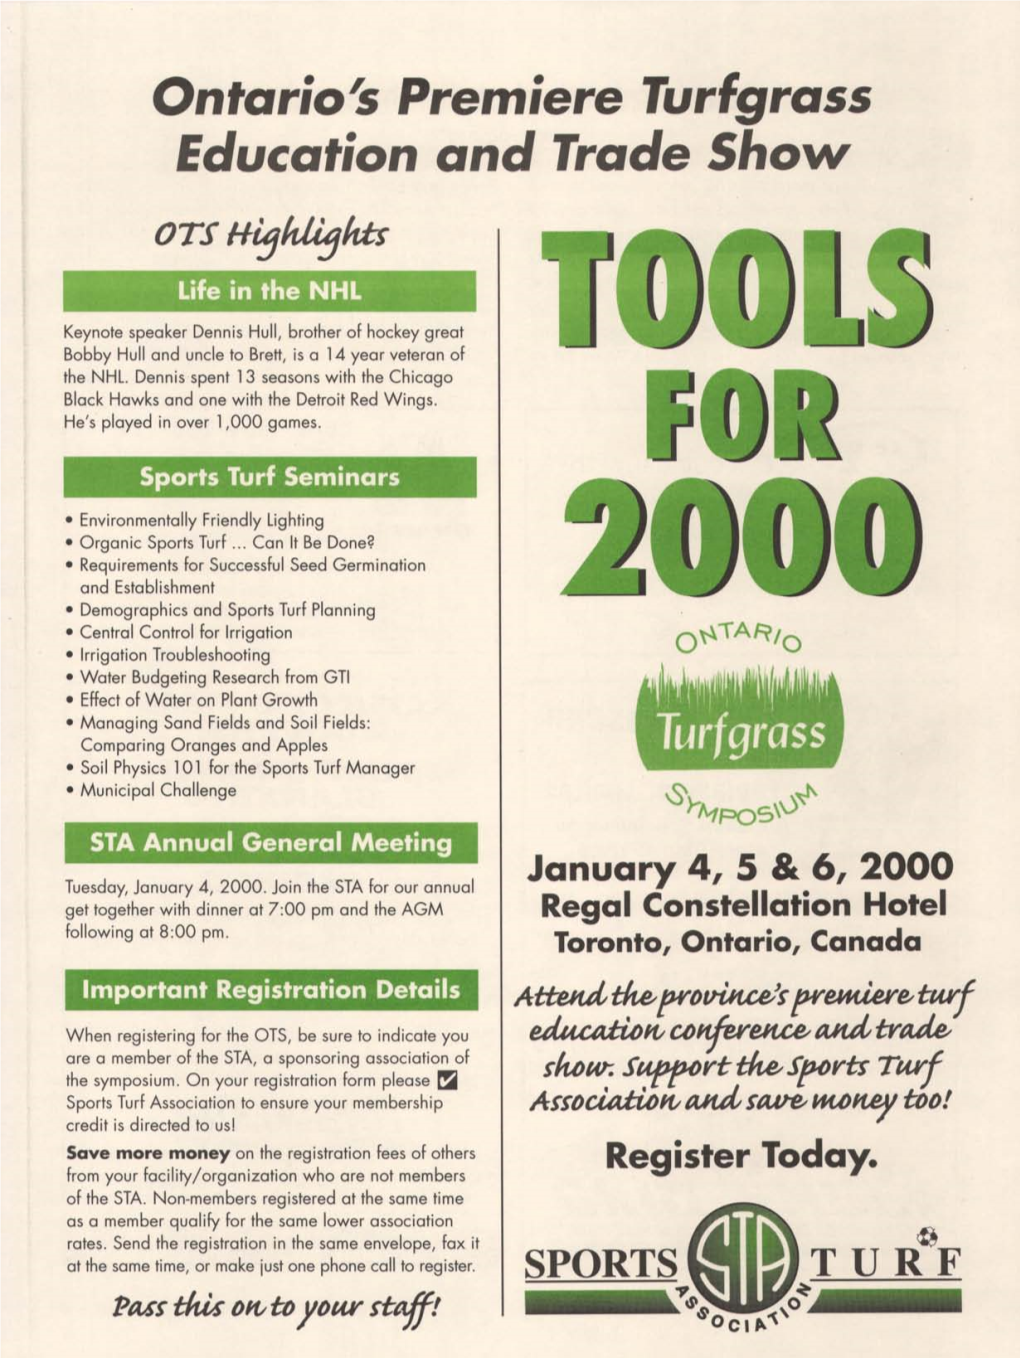 Ontario's Premiere Turfgrass Education and Trade Show